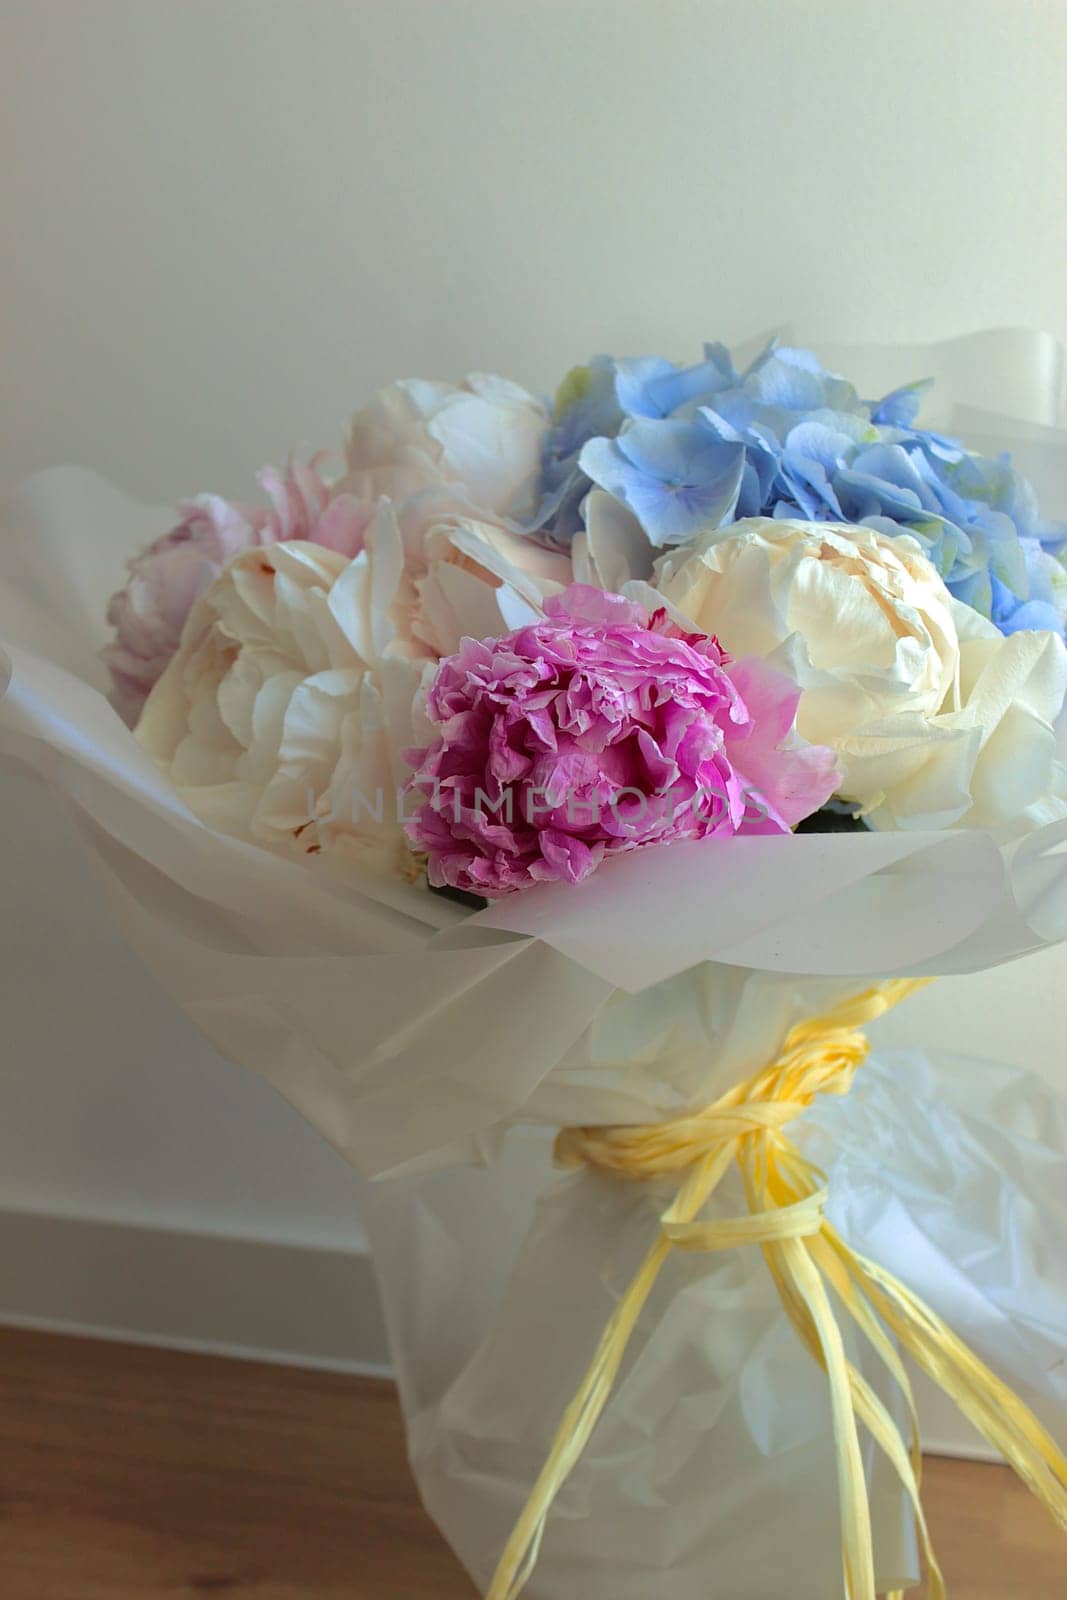 A bouquet of blooming white and pink peonies of delicate color by MilaLazo